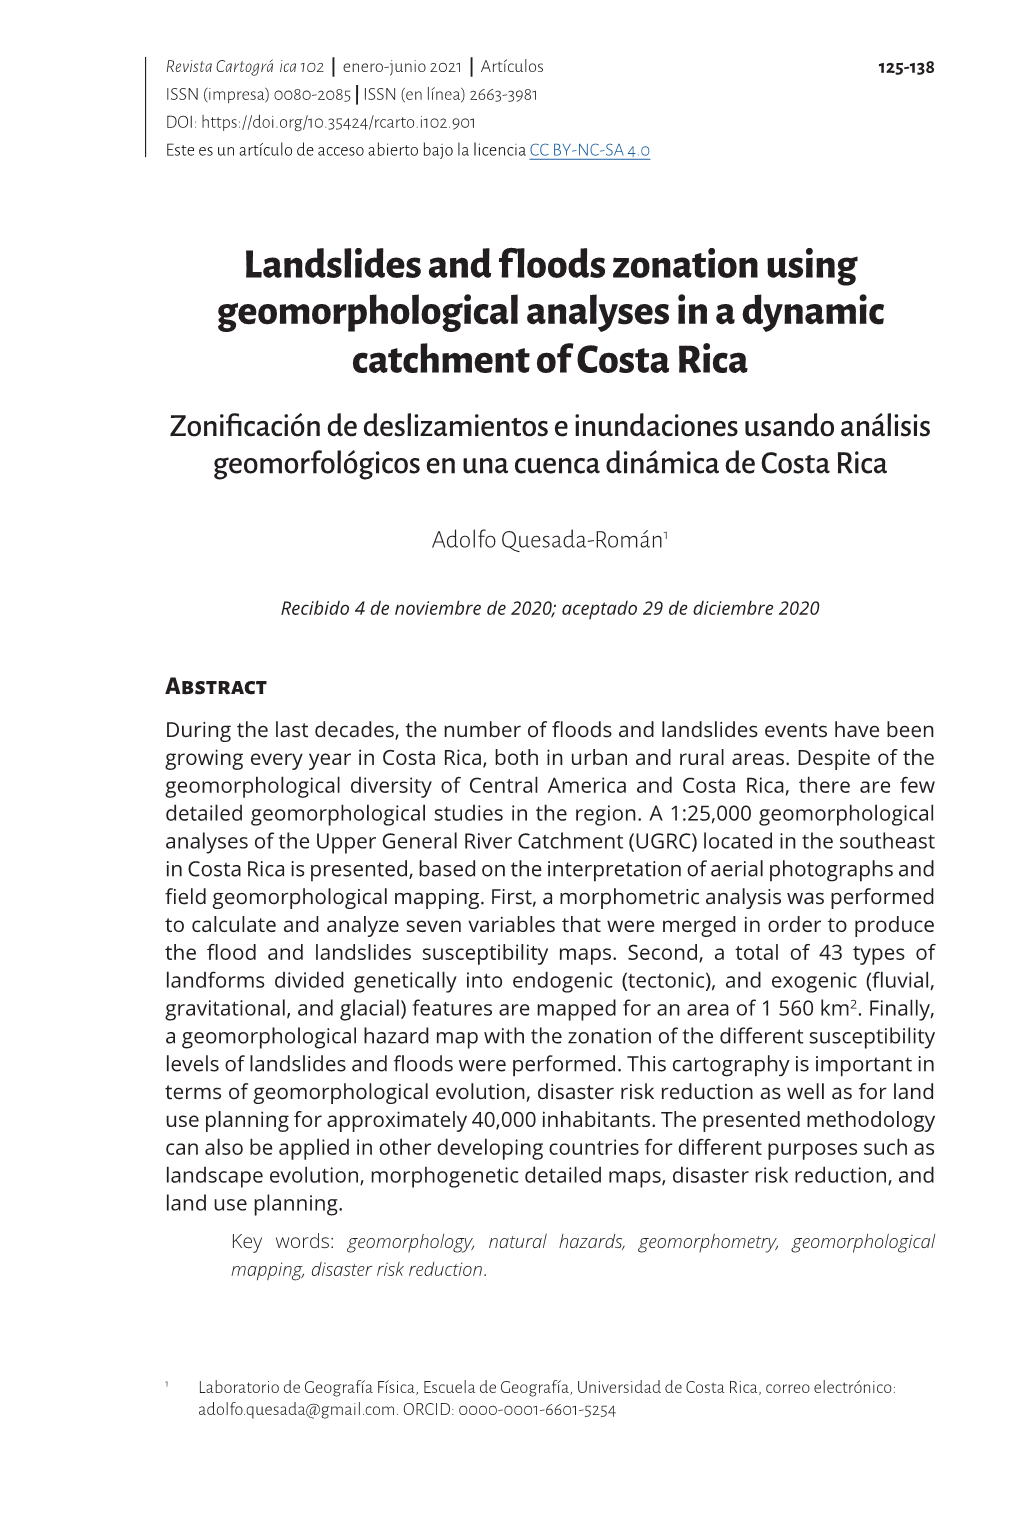 Landslides and Floods Zonation Using Geomorphological Analyses in A